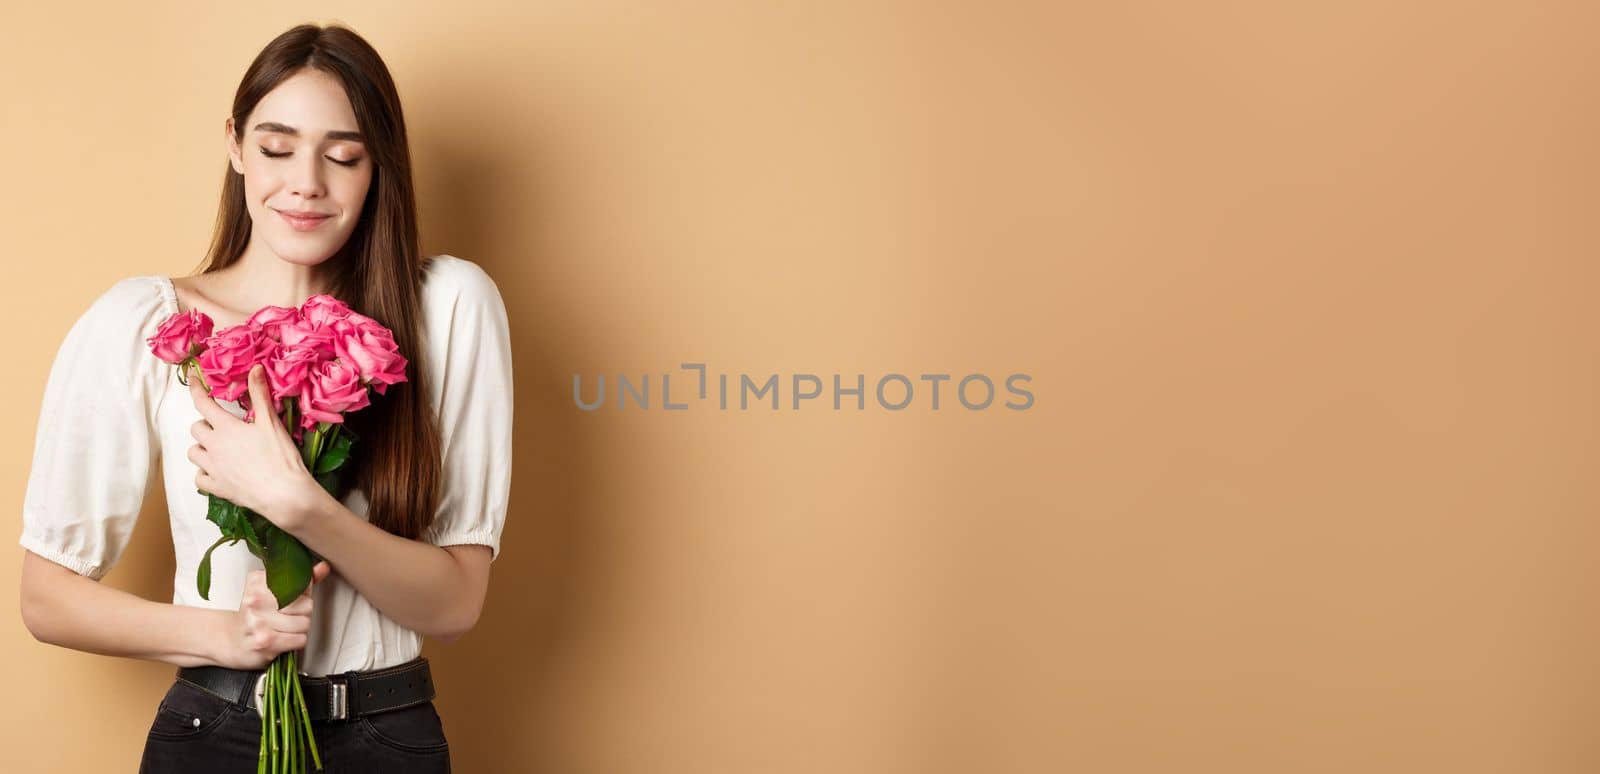 Valentines day. Tender and romantic girl, smell roses and smile with closed eyes. Girlfriend hugging gift flowers from lover, standing on beige background.